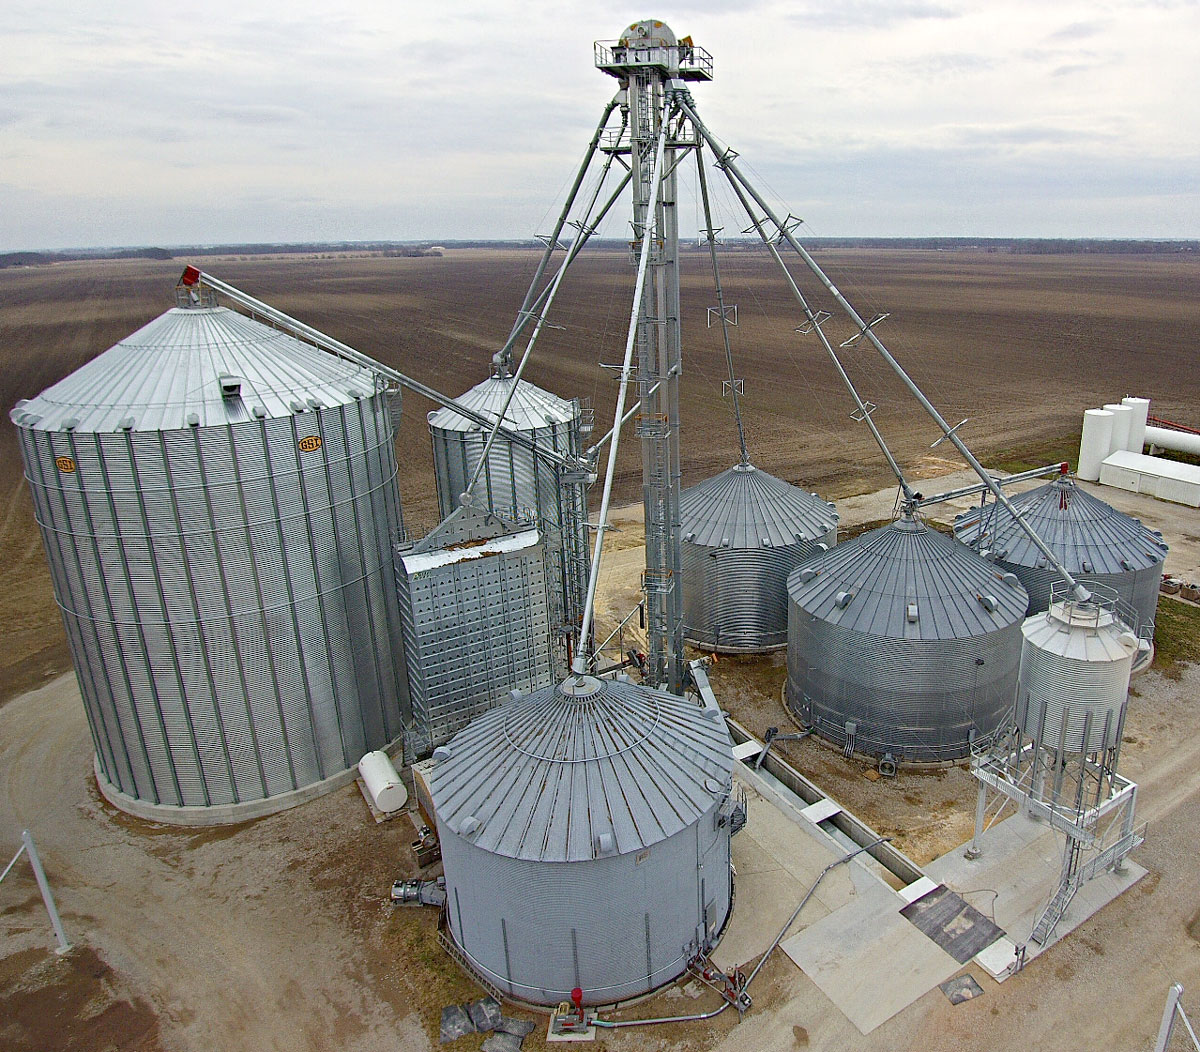 Aerial View of Silos